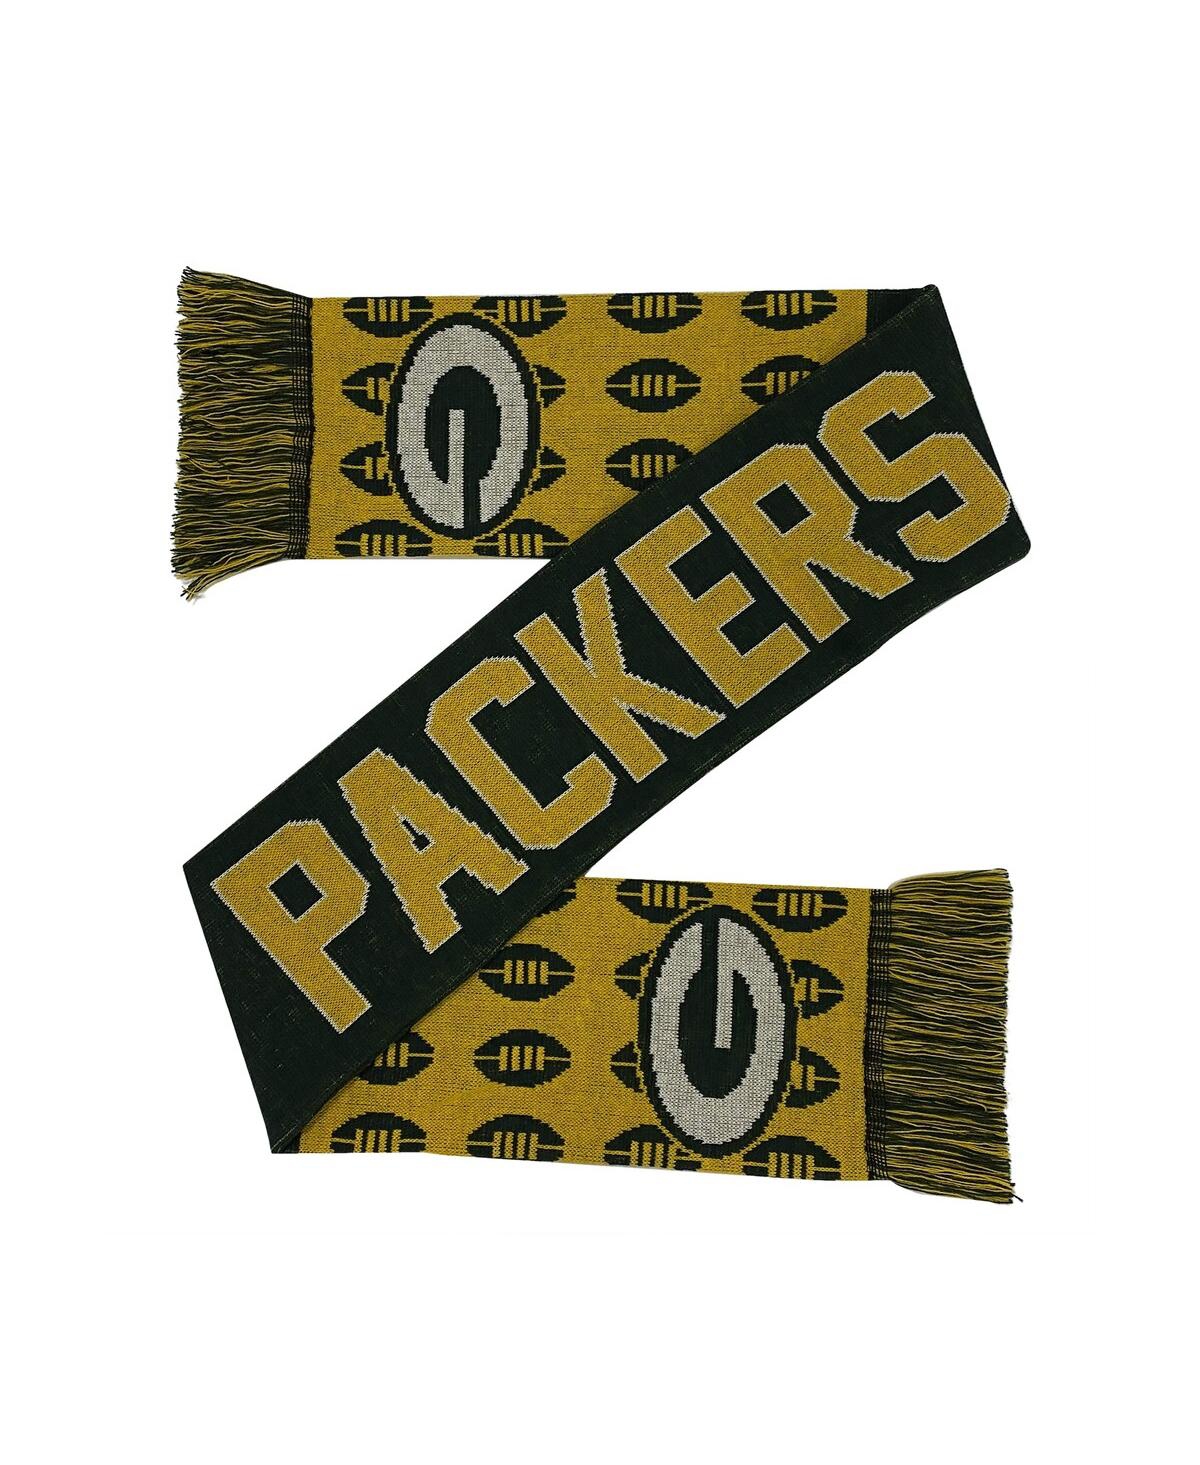 Men's and Women's Foco Green Bay Packers Reversible Thematic Scarf - Black, Yellow